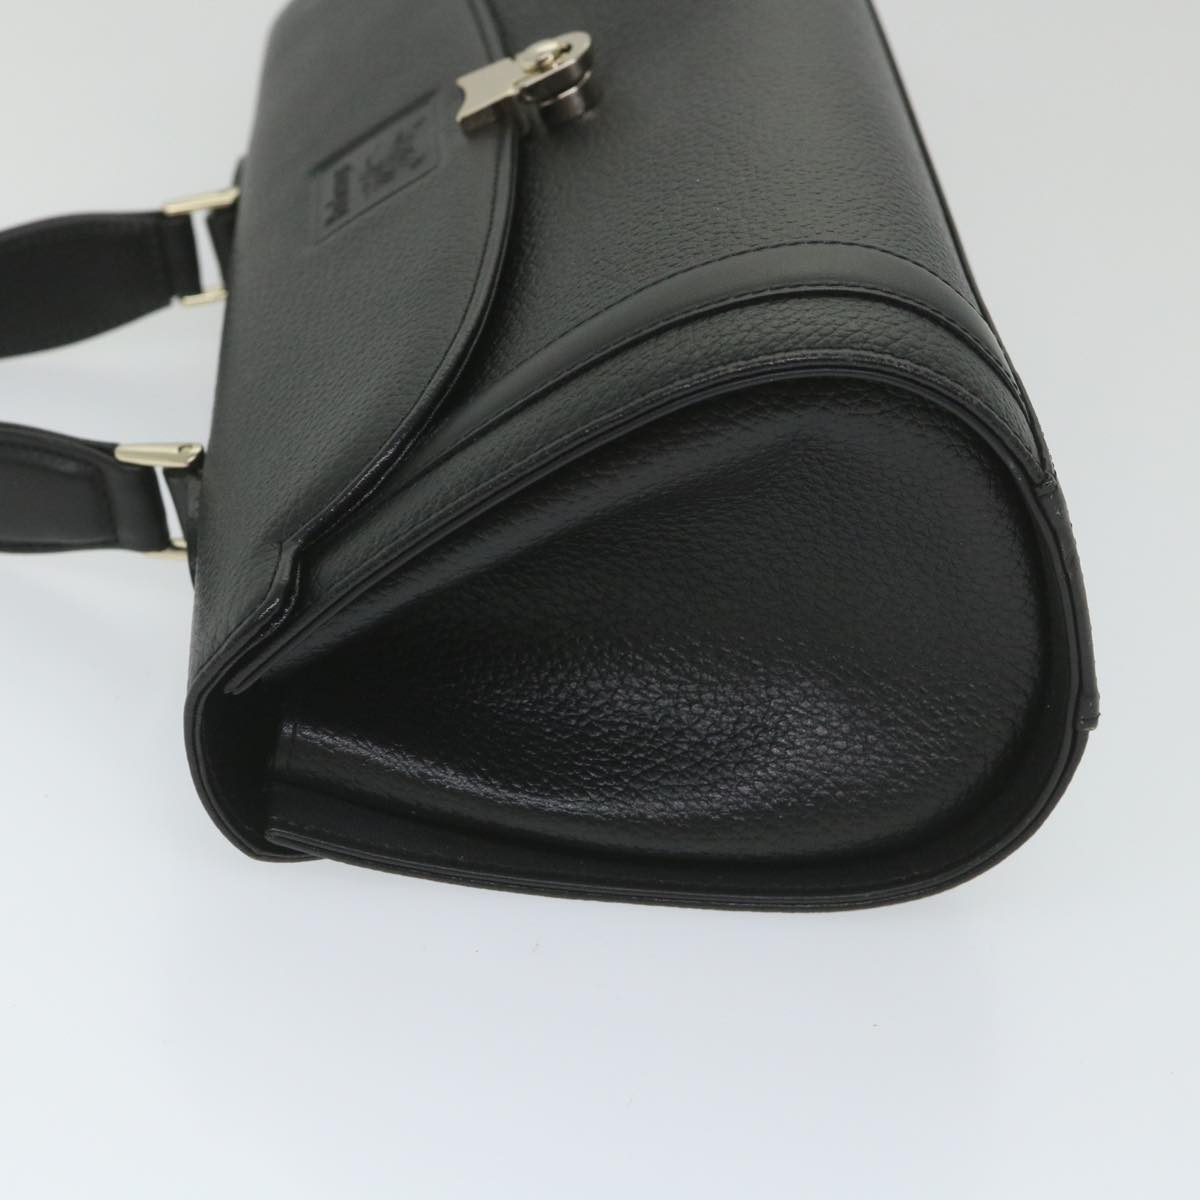 Burberrys Hand Bag Leather Black Auth ep2109